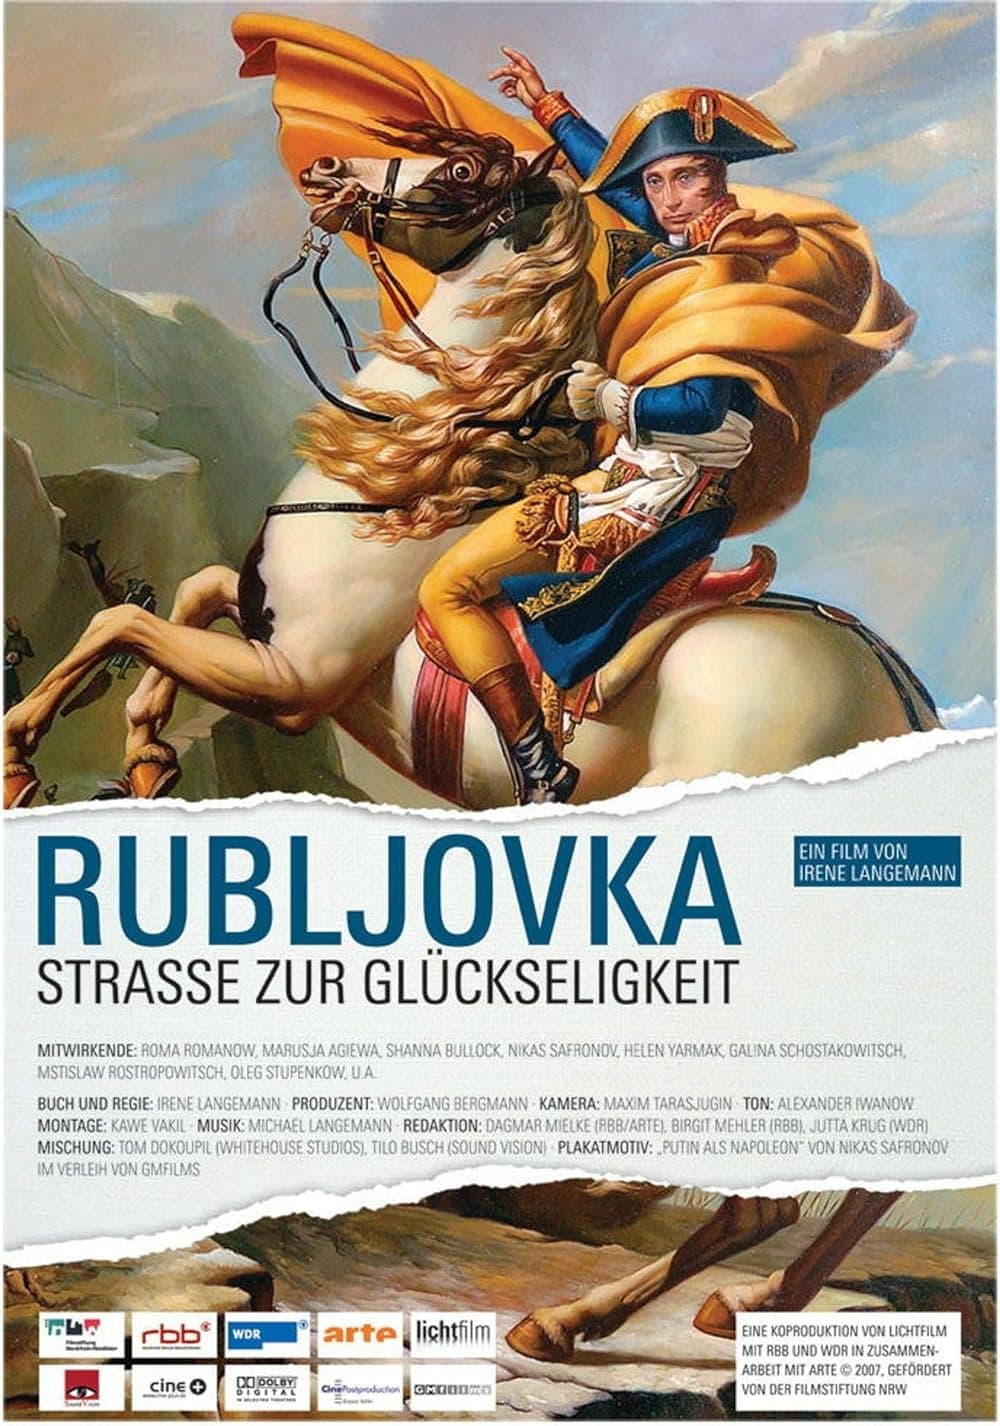 Rubljovka – Road to Bliss